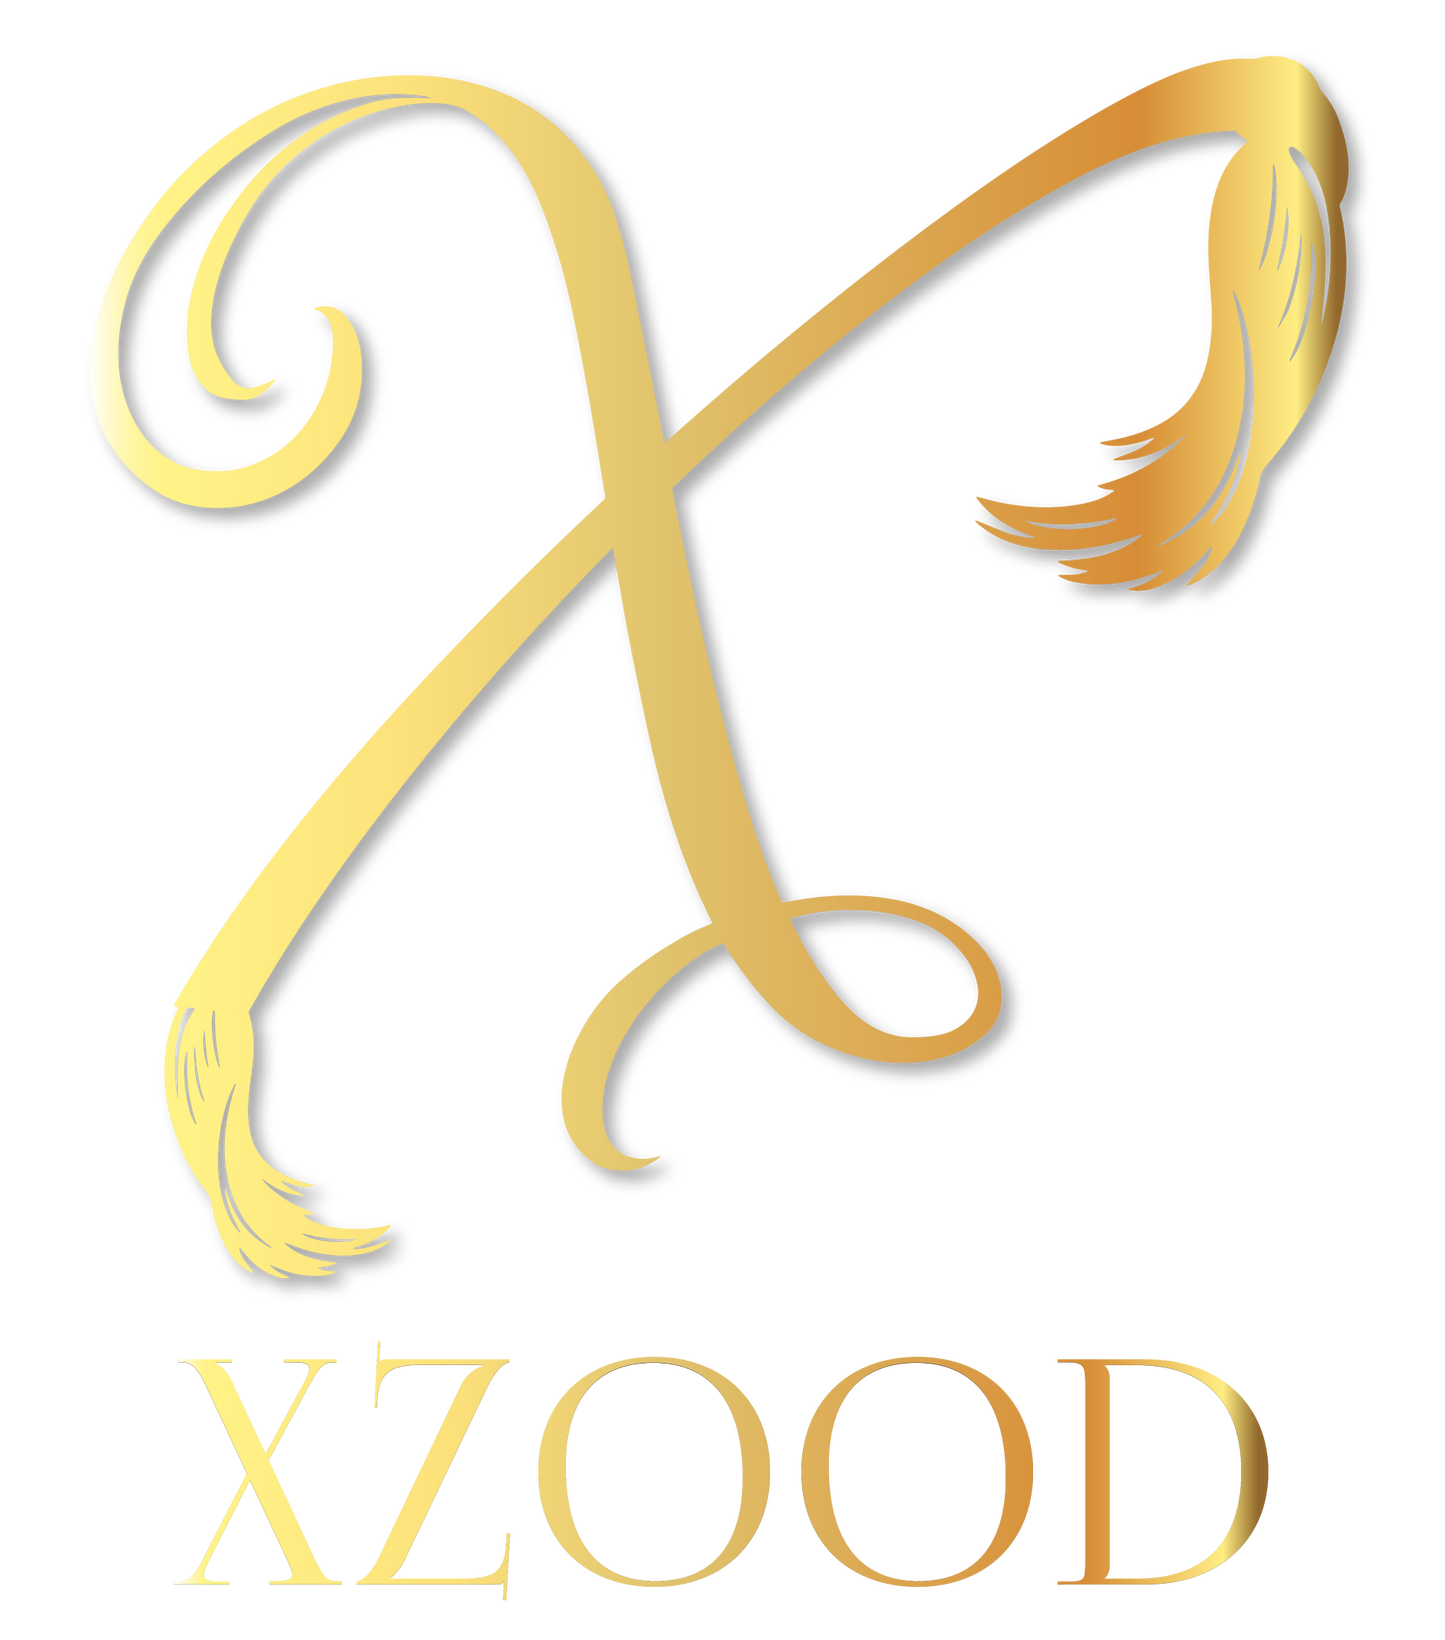 XzoodQueen Gift Card